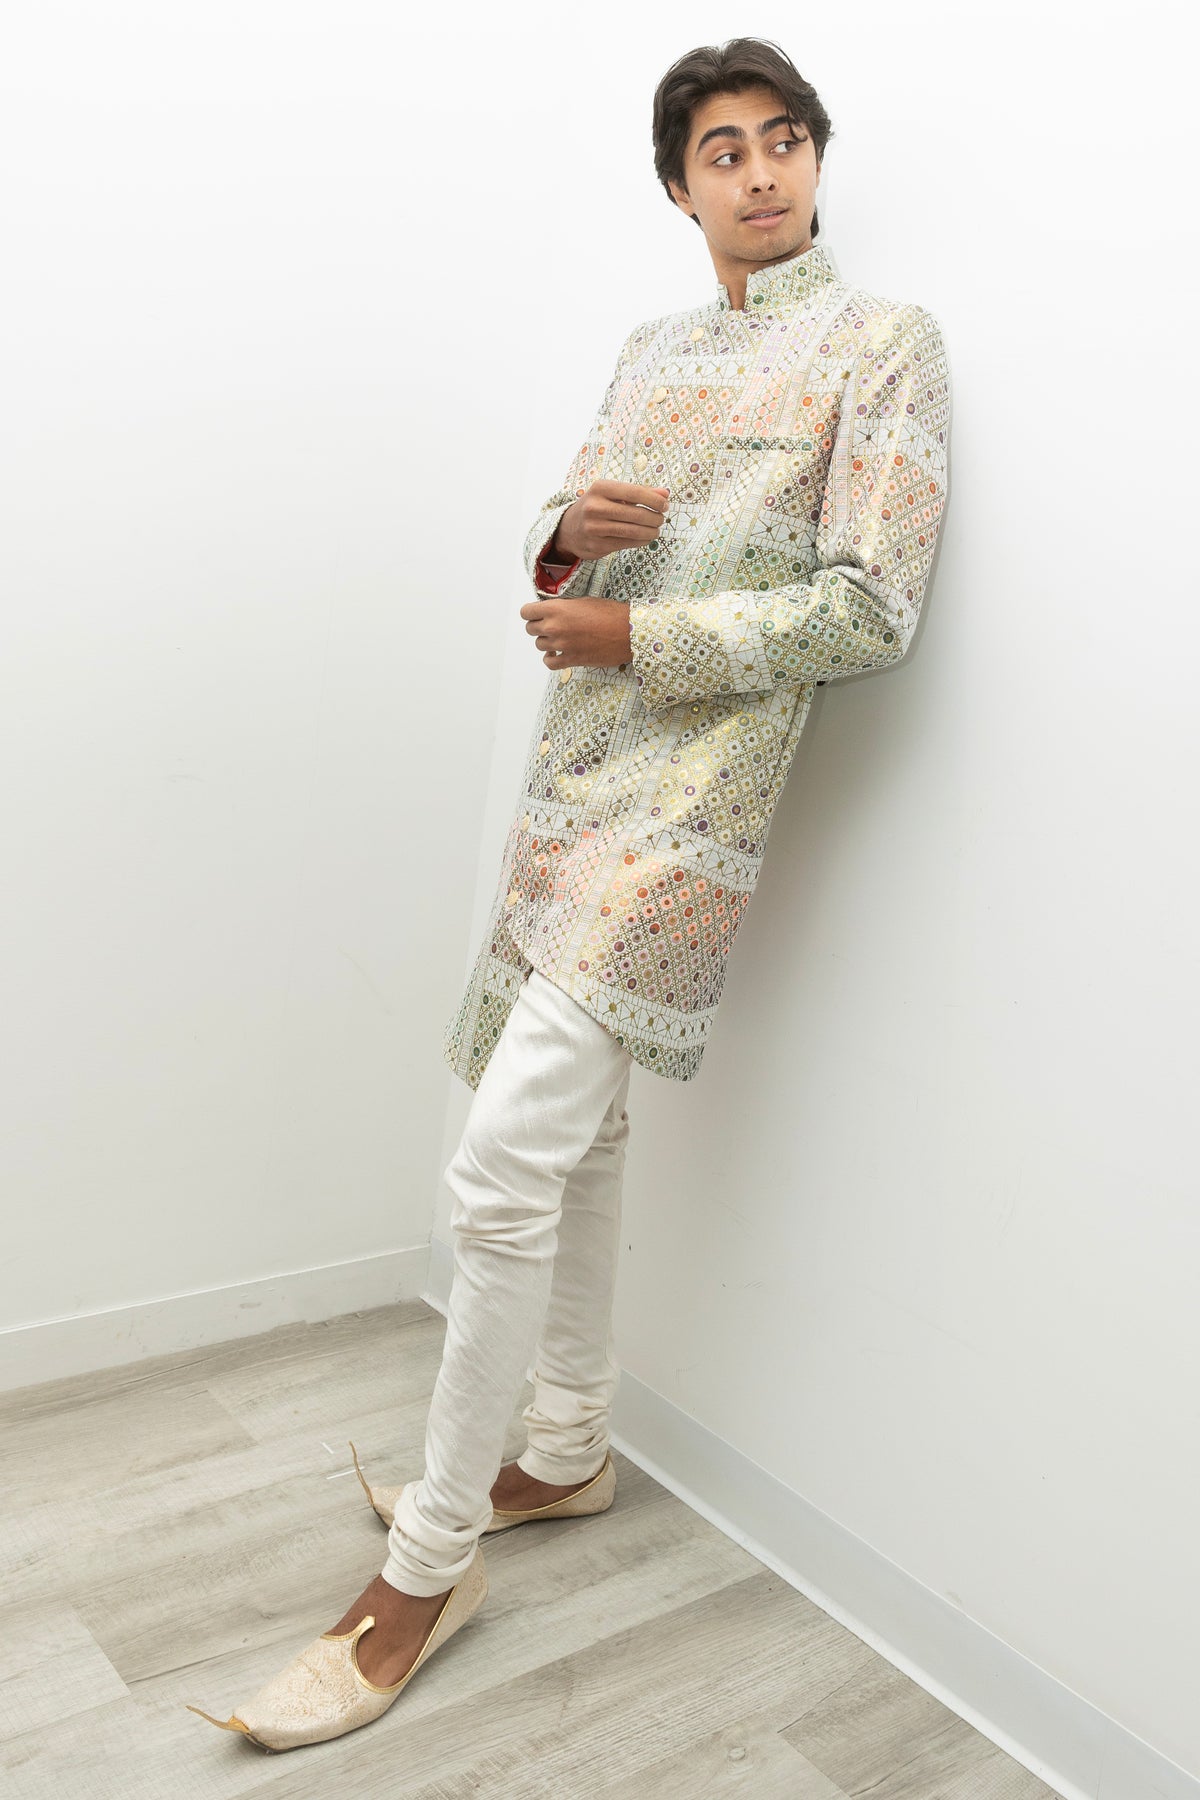 Geometric sherwani colorful and golden jacquard with white pajama pants in front of a plain white background